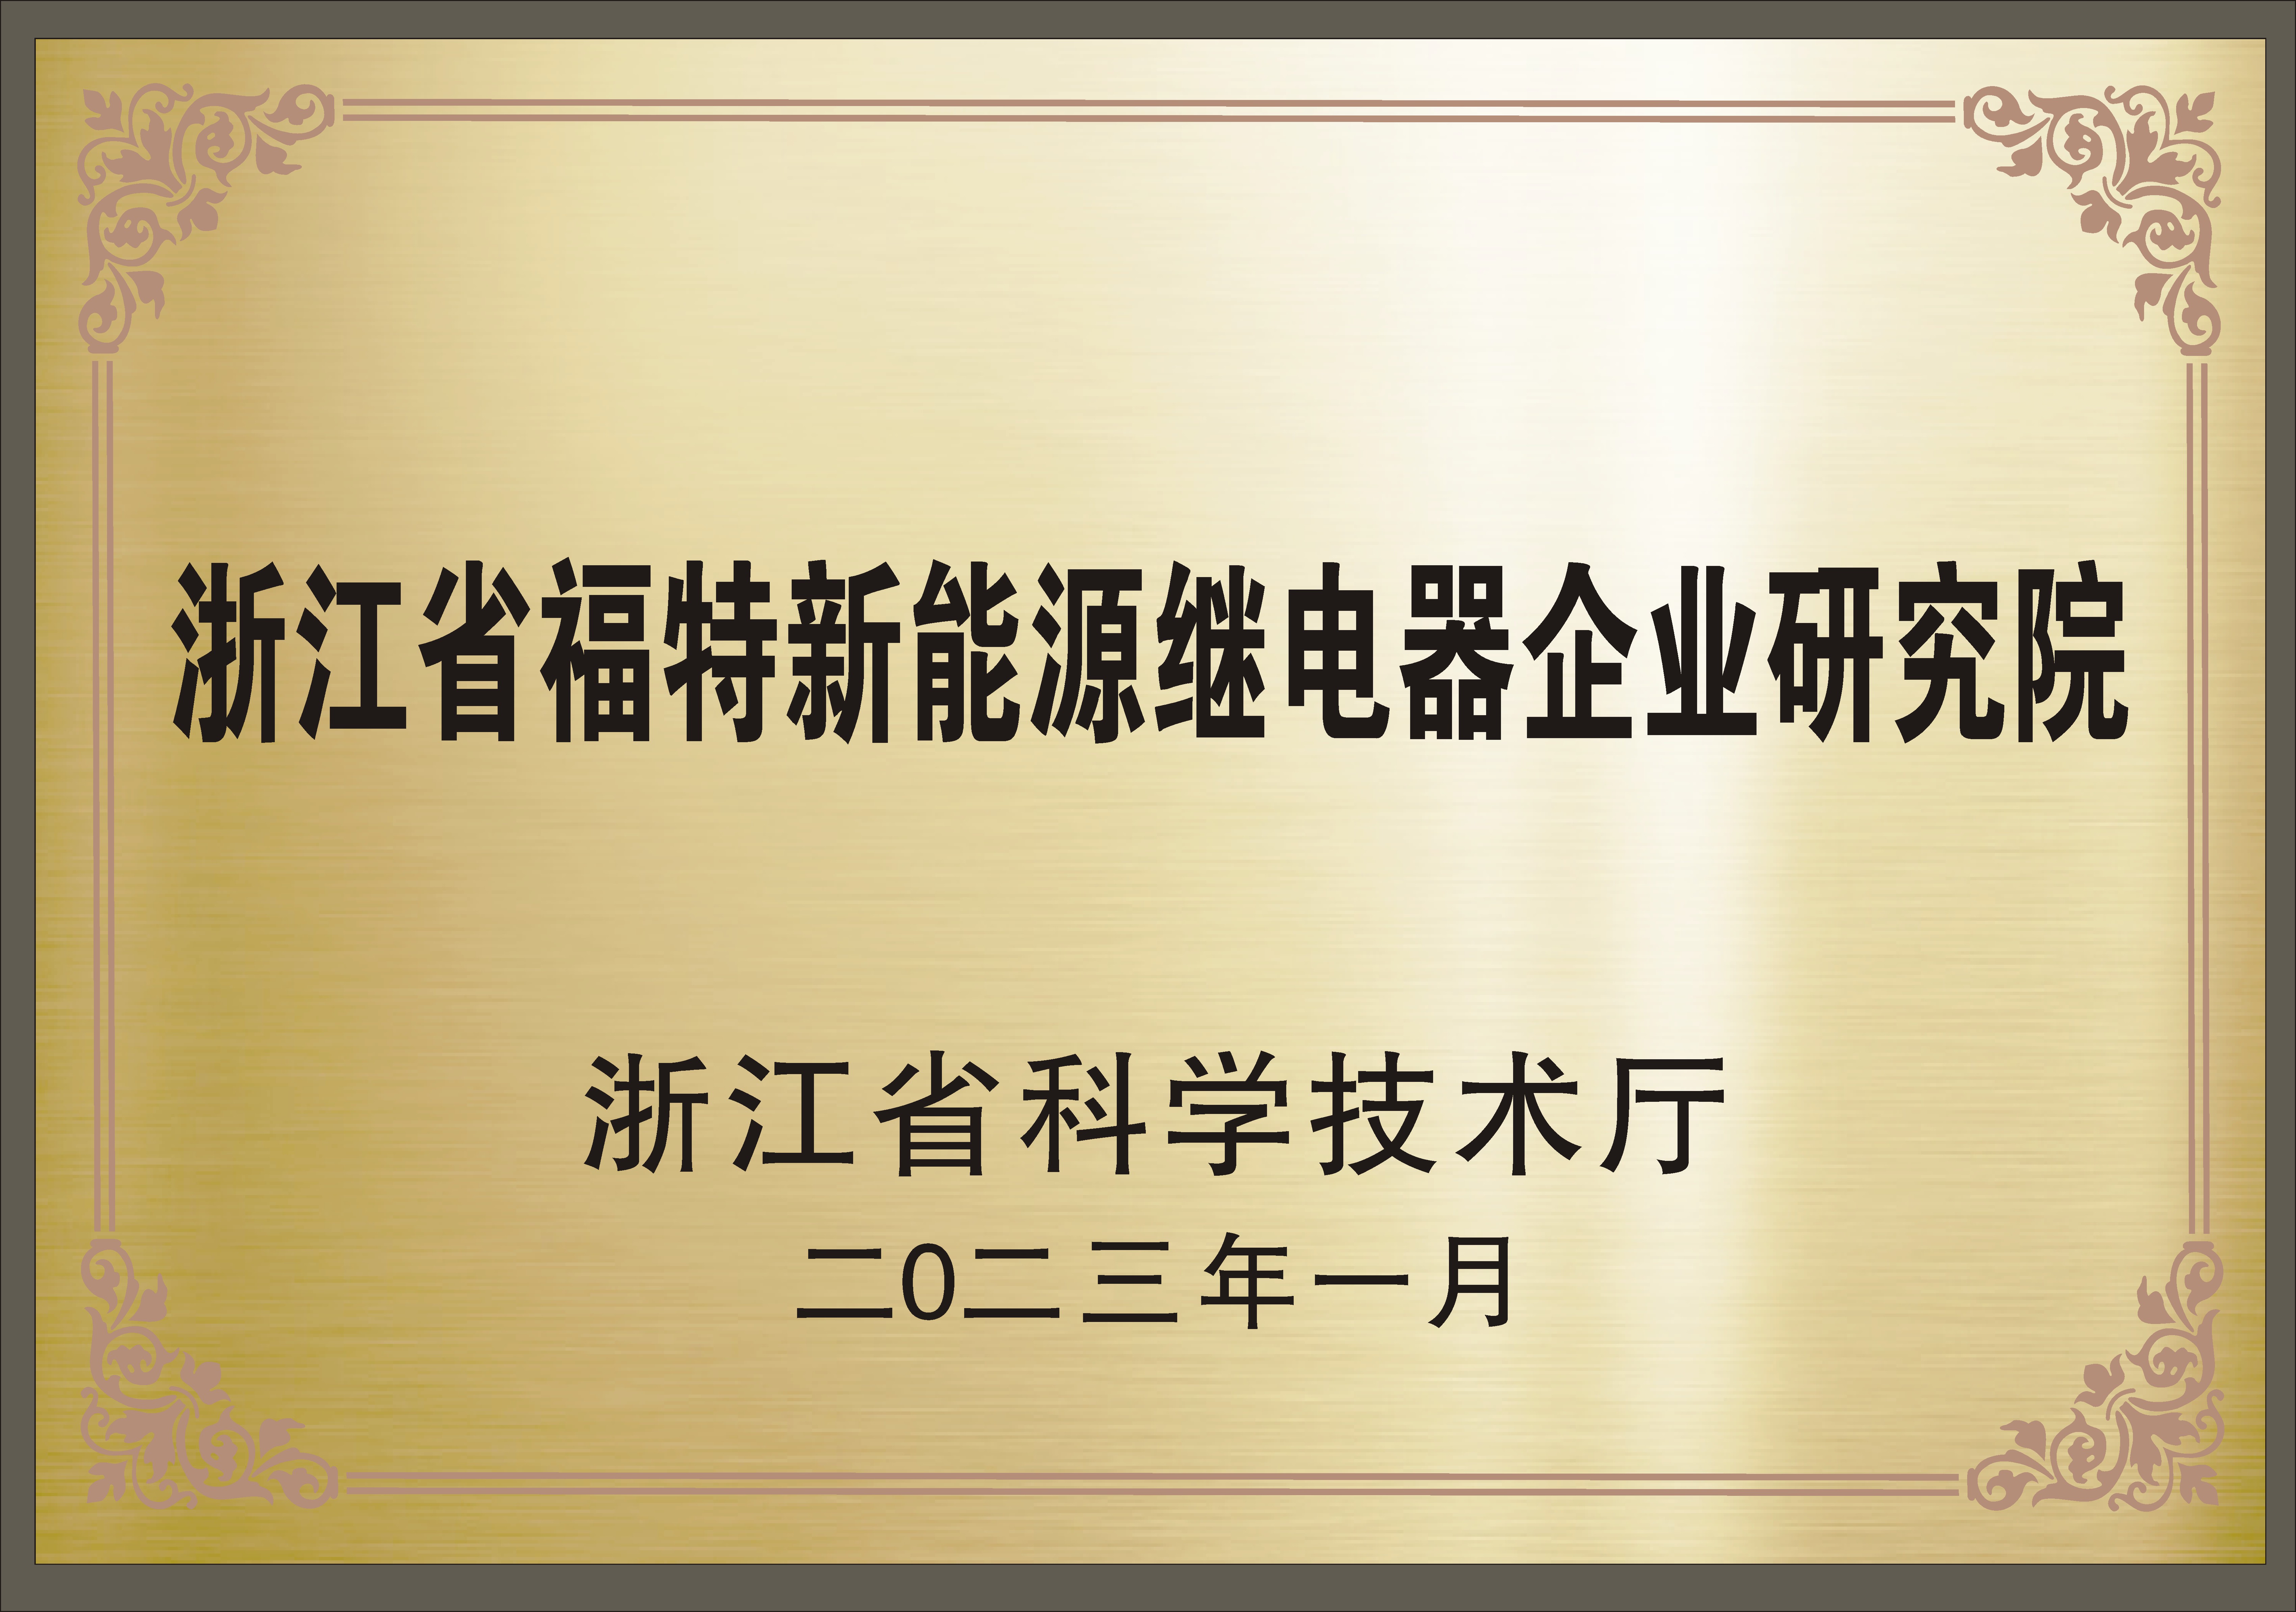 Congratulations! Zhejiang New Energy Research Institute qualified